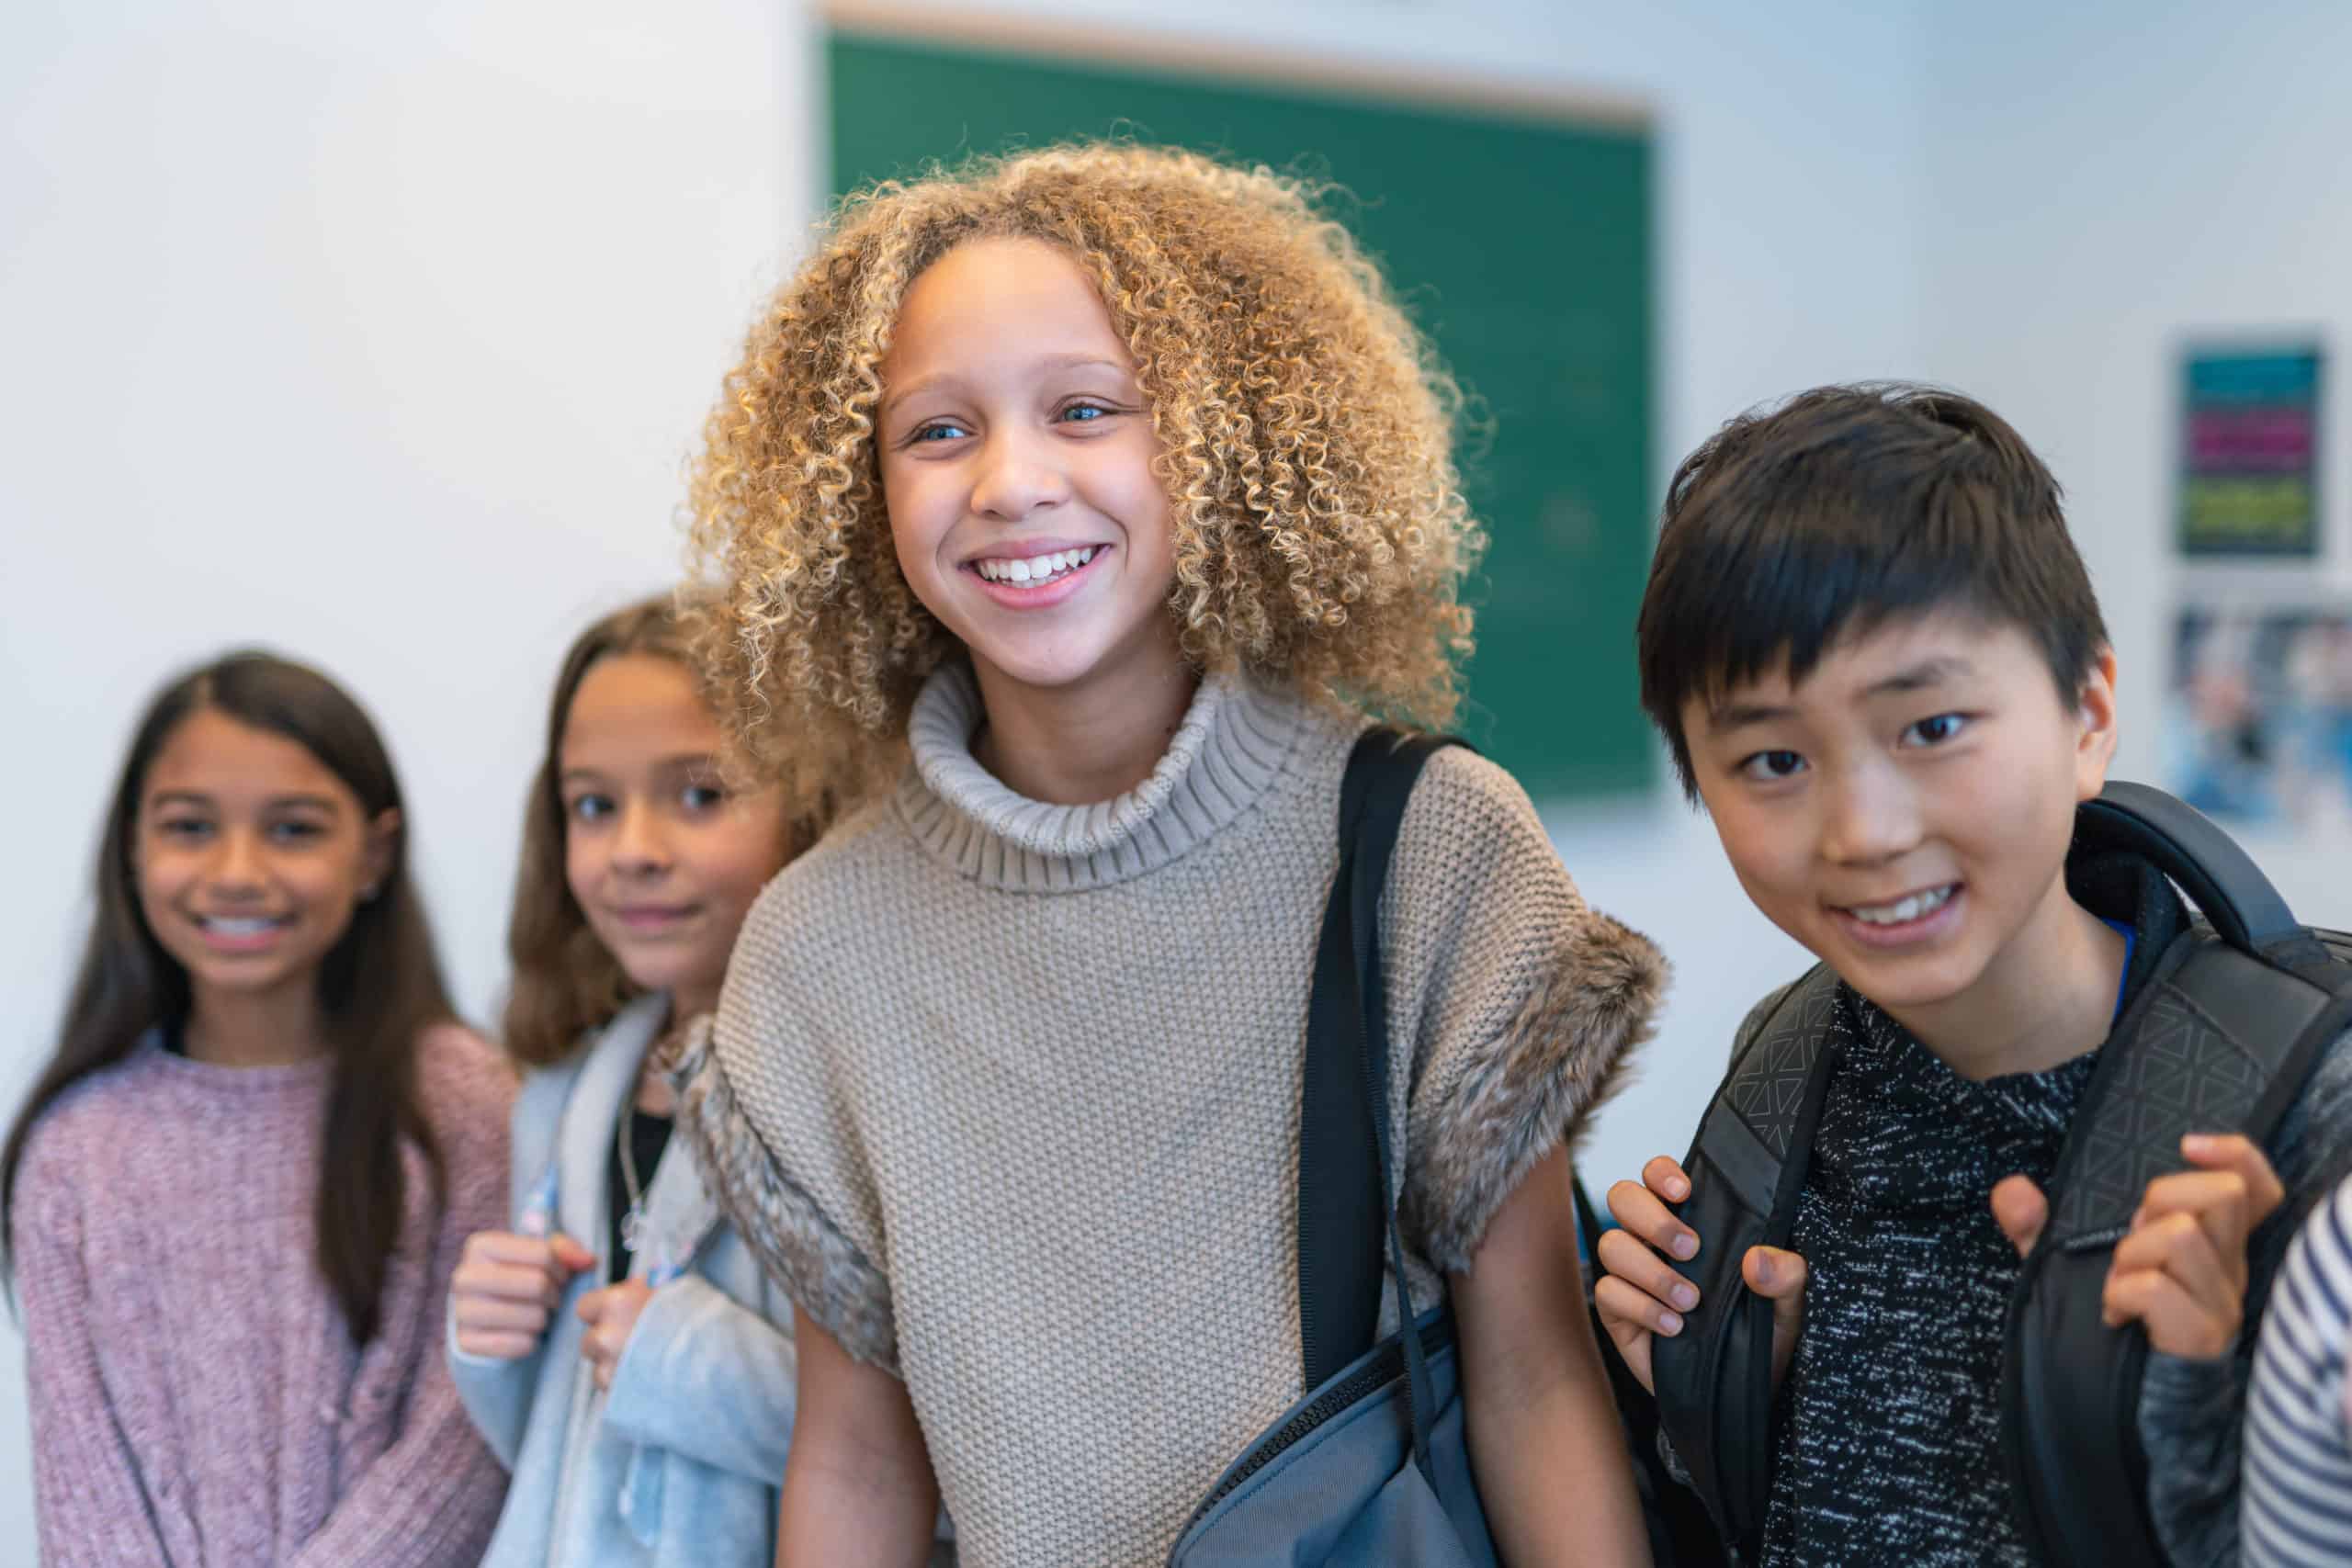 A multi-ethnic group of elementary age students is standing in a row in their classroom. They are smiling and wearing their backpacks. The image is focused on a multi-ethnic girl at the center of the group. She is taller than her classmates.